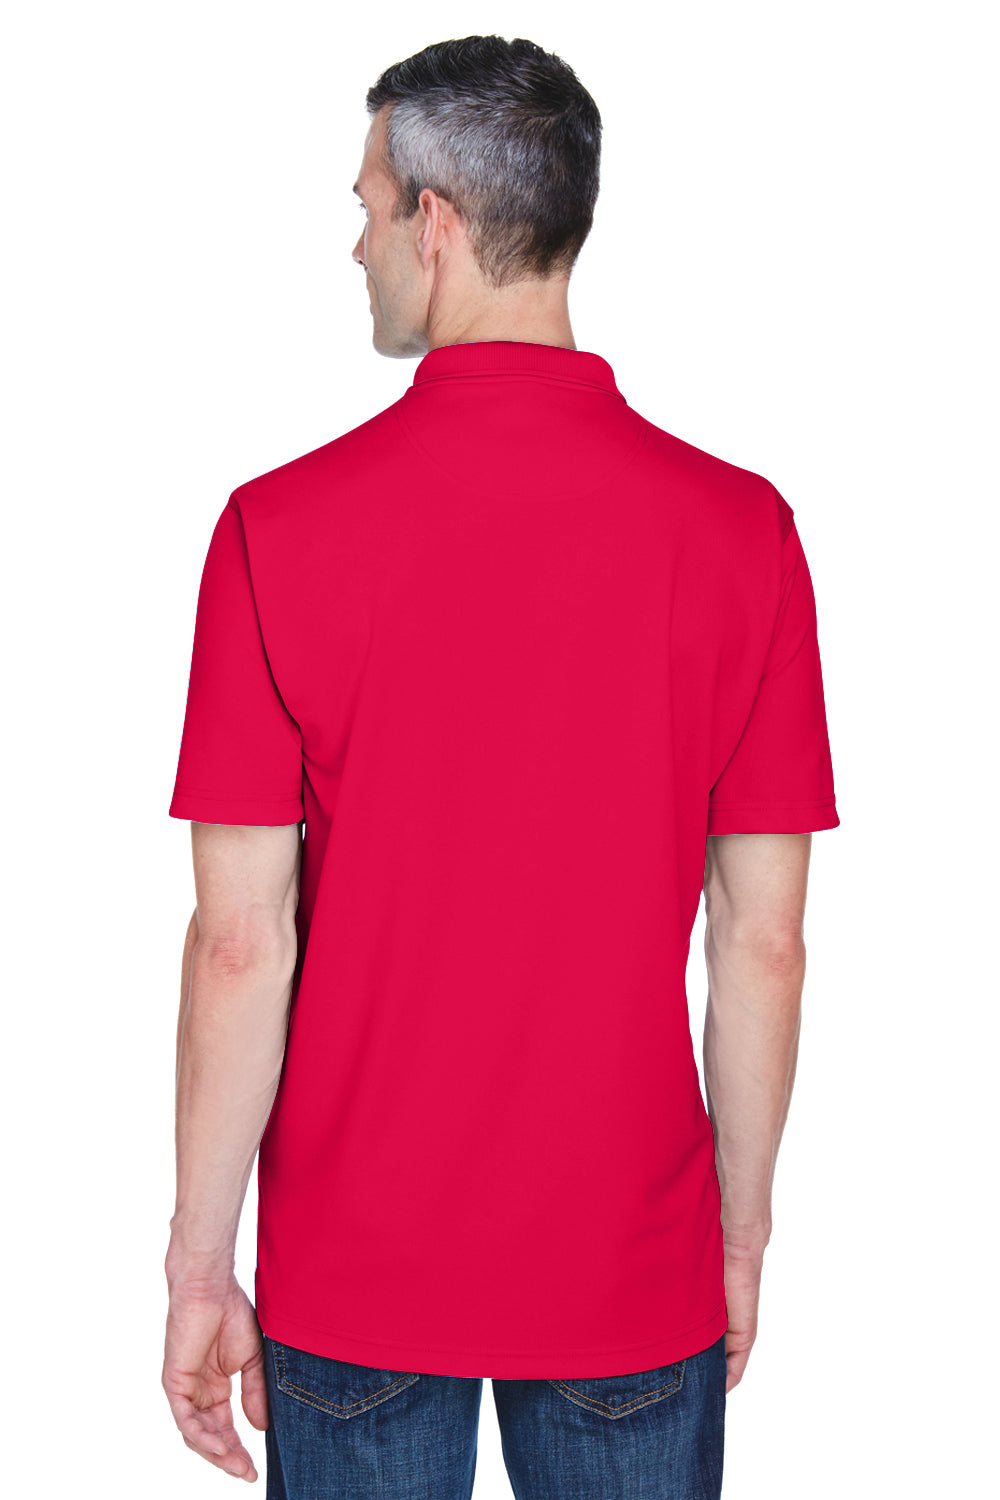 UltraClub 8445 Mens Cool & Dry Performance Moisture Wicking Short Sleeve Polo Shirt Red Back